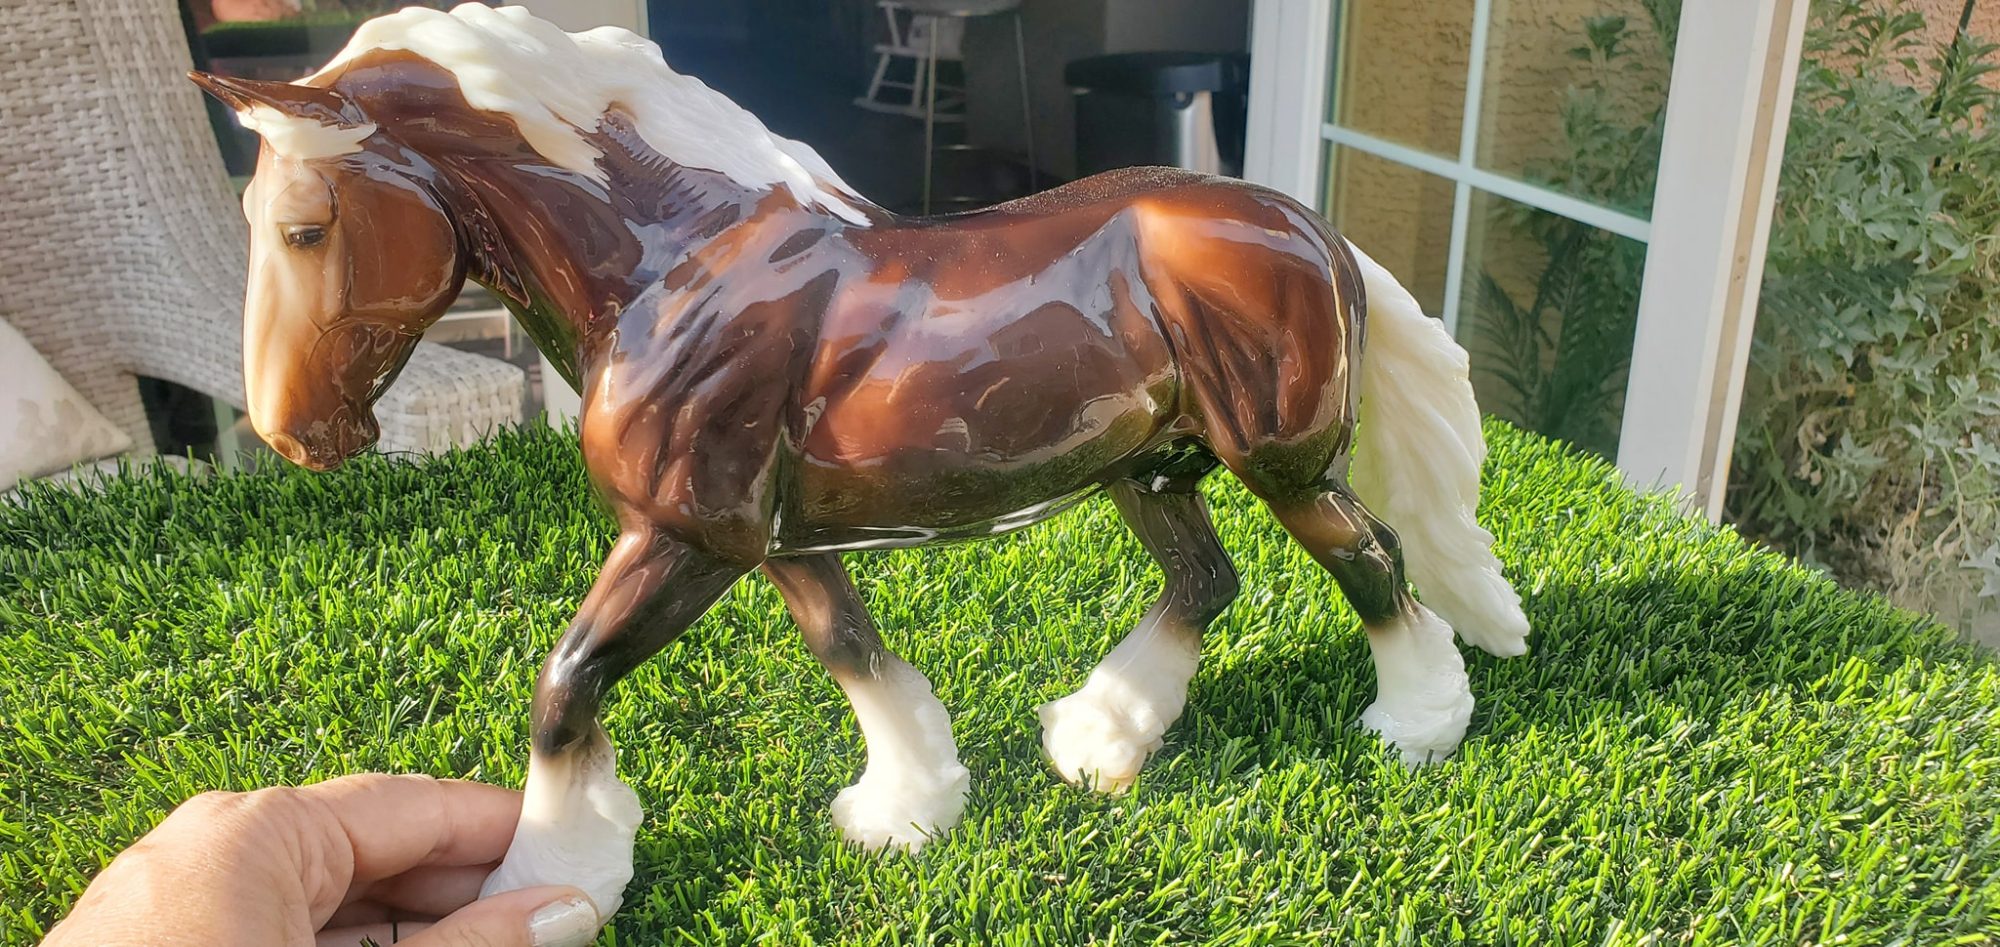 We had a Breyer Horse auction on our Facebook!